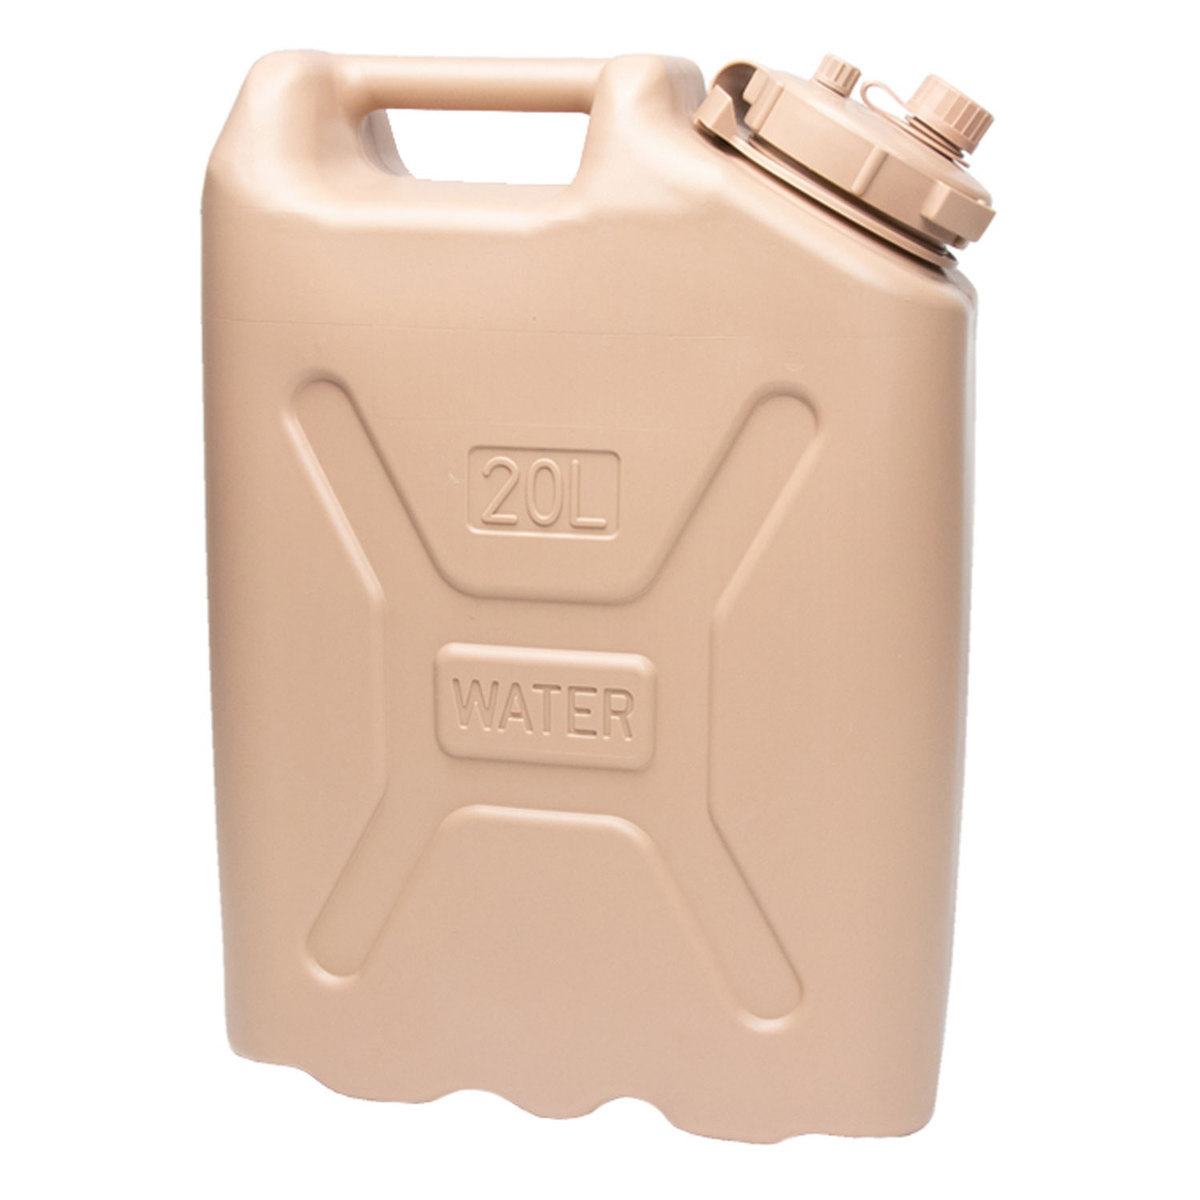 Scepter 2.5 Gallon Water Container  Rendezvous River Sports - Rendezvous  River Sports